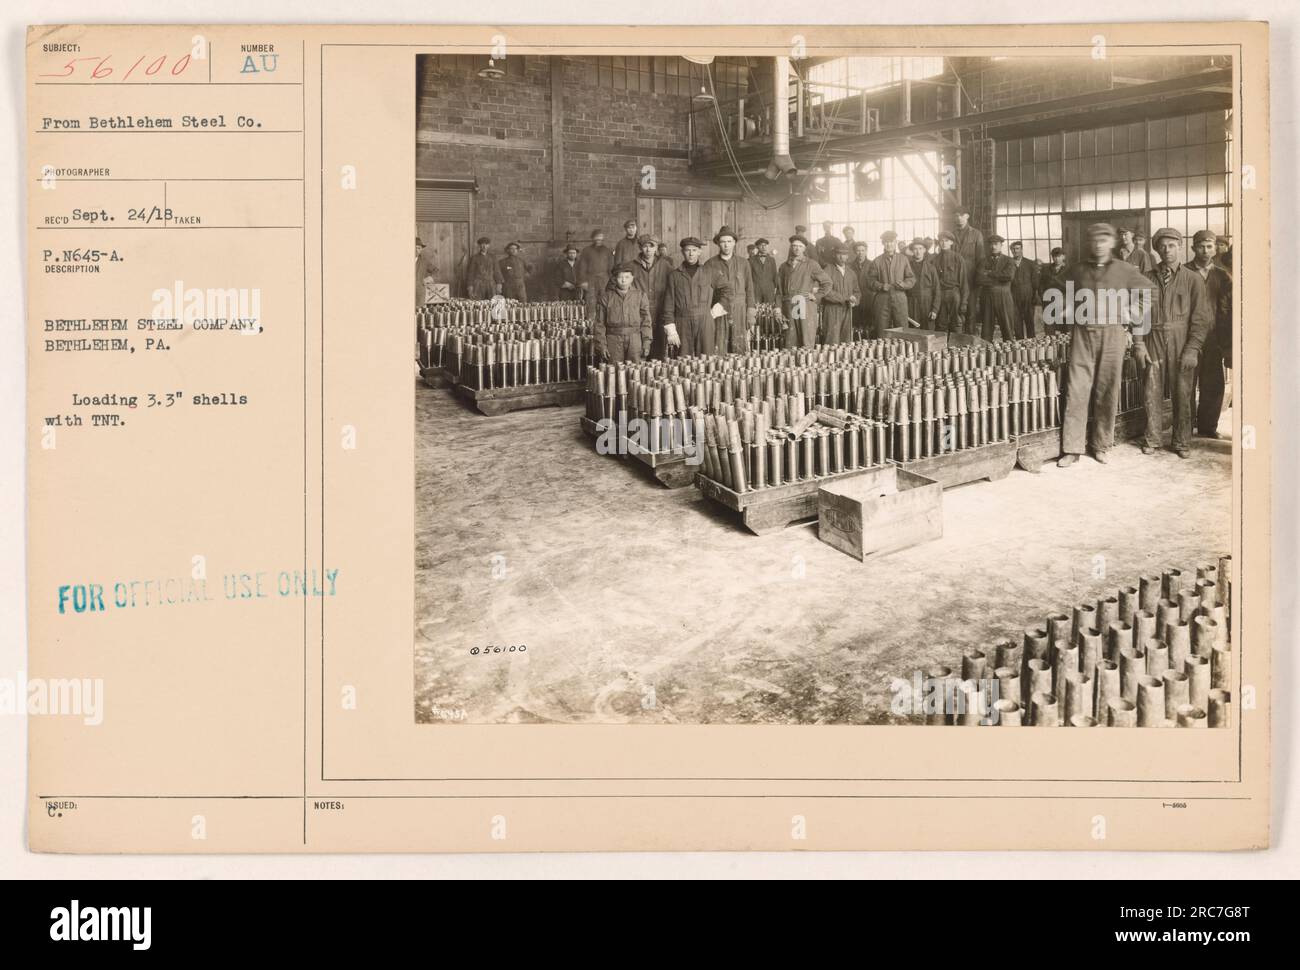 Caption: Workers at Bethlehem Steel Company in Bethlehem, PA, load 3.3" shells with TNT during World War I. This photograph, taken by photographer RECO on September 24, 1918, focuses on the crucial production of artillery ammunition. The image is marked as "FOR OFFICIAL USE ONLY WUED NOTES." Stock Photo